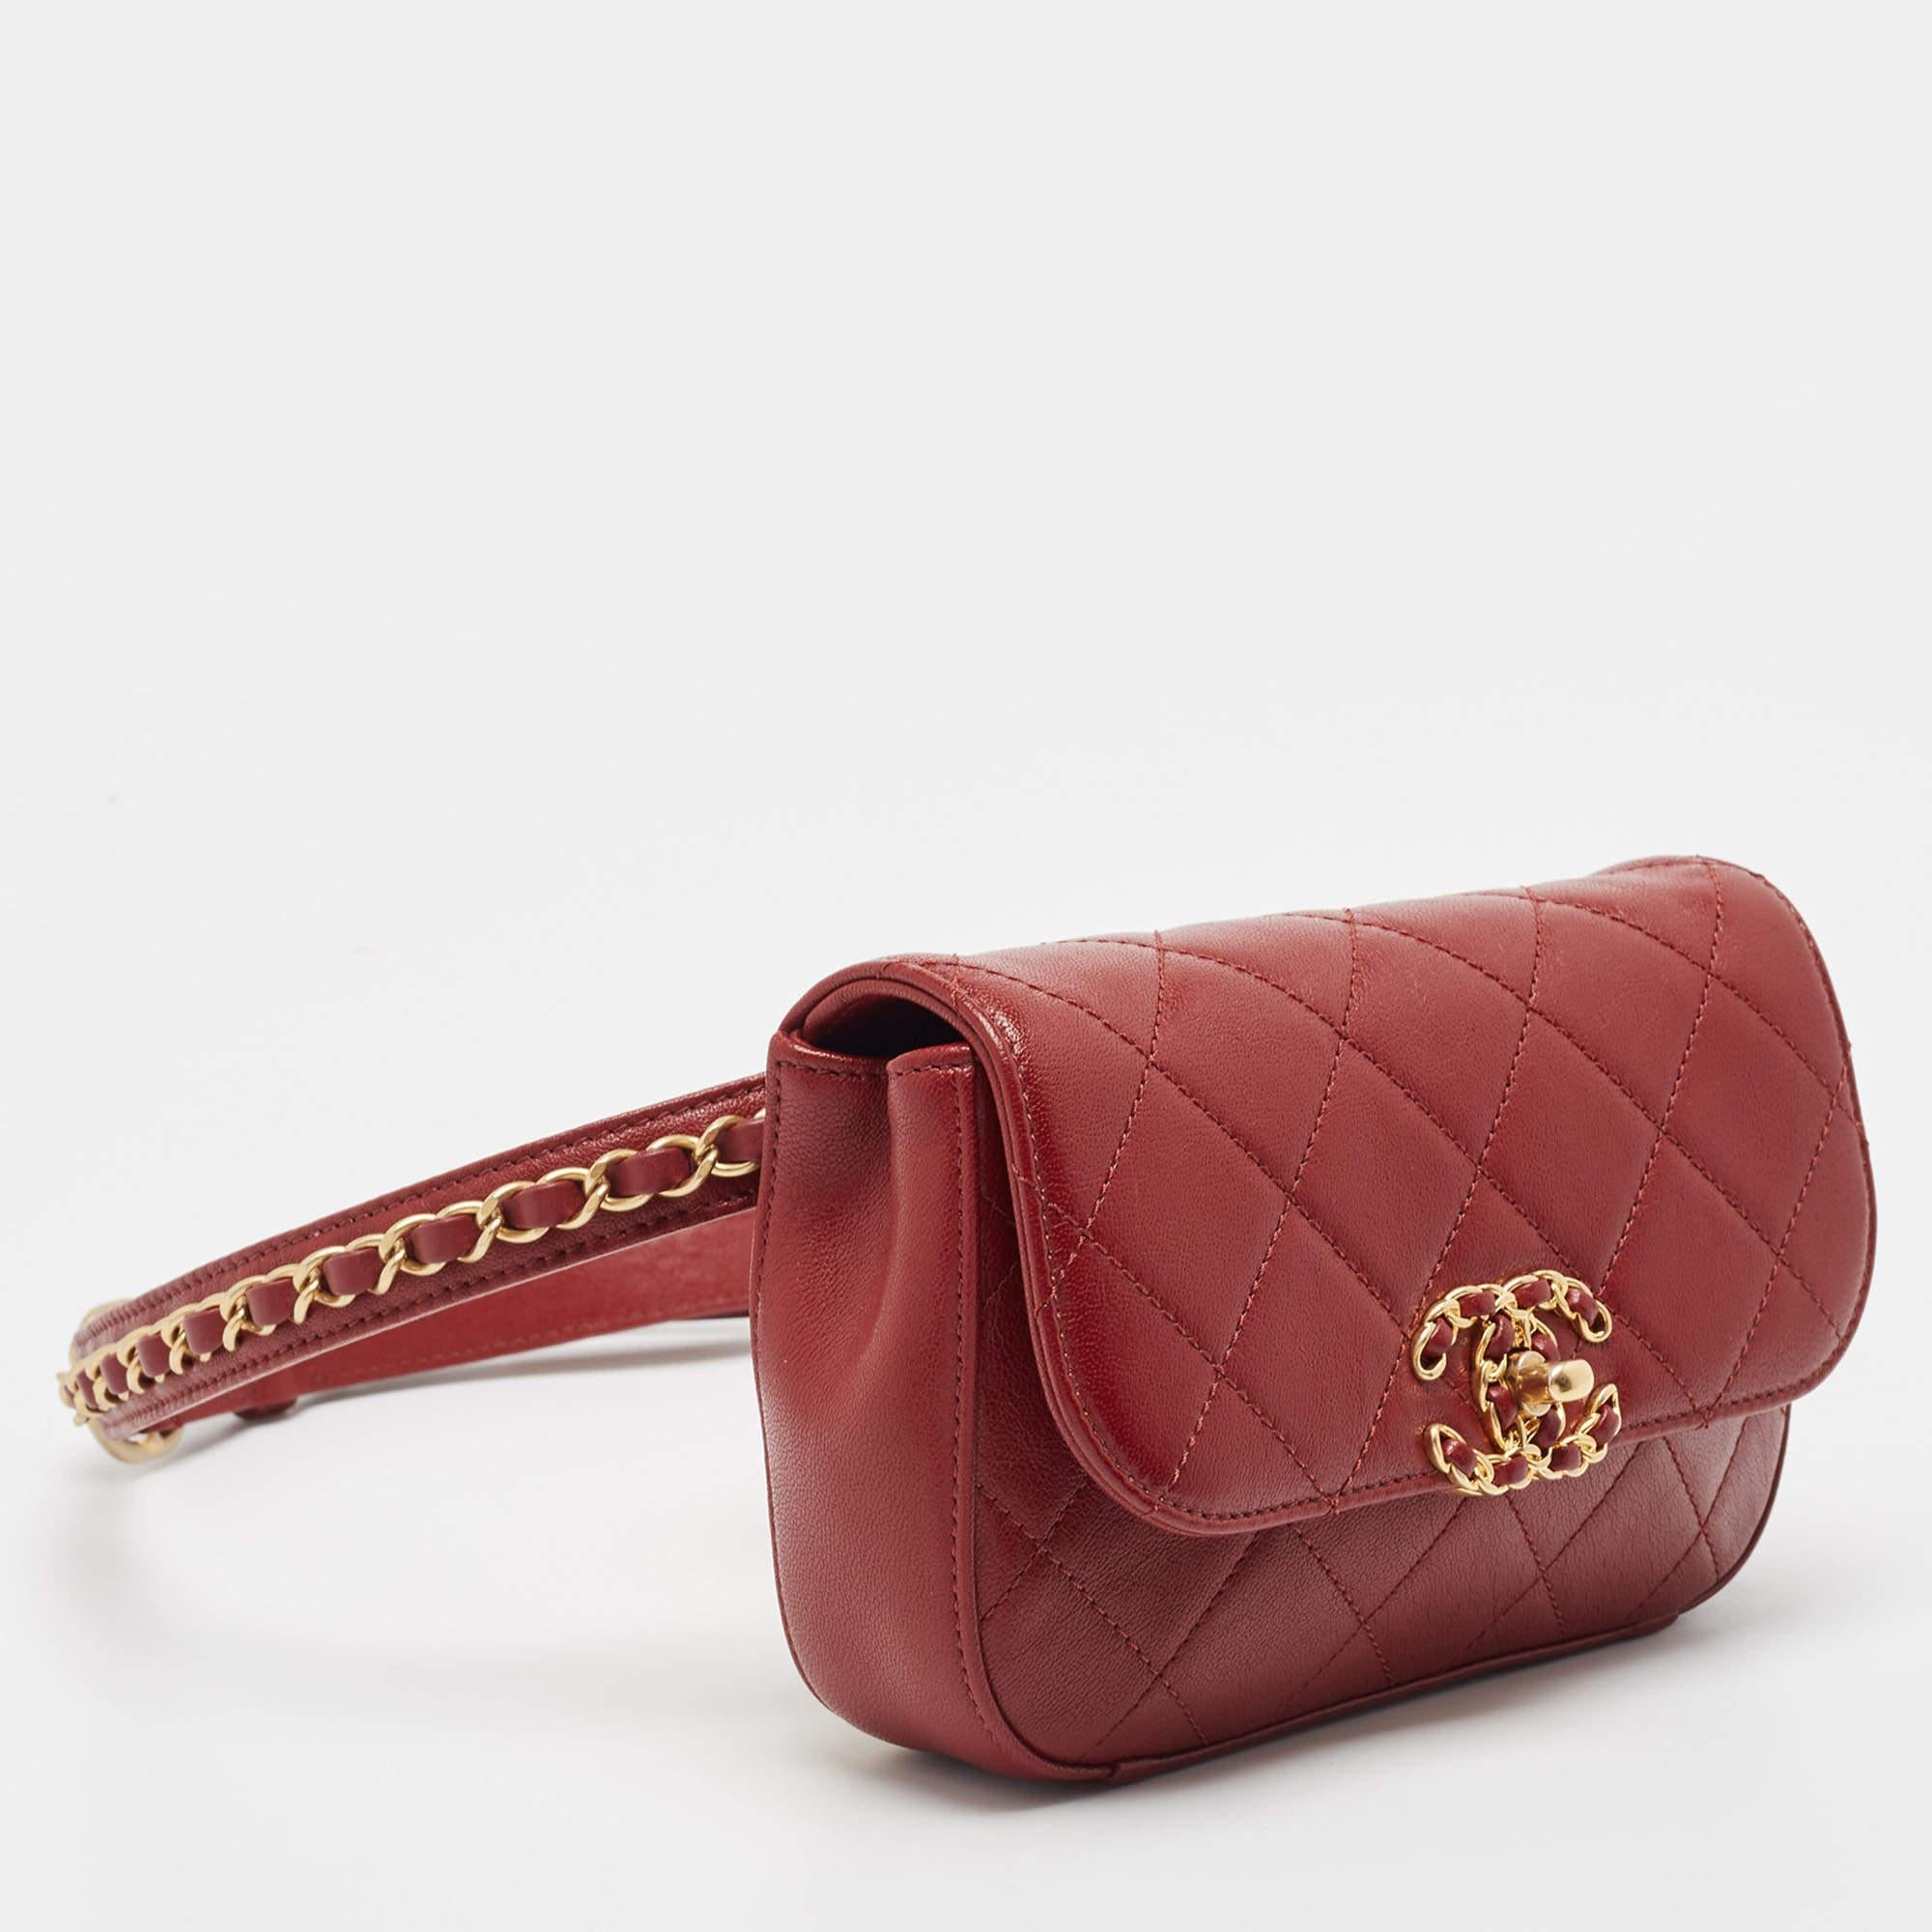 Chanel Dark Red Quilted Leather CC Flap Belt Bag For Sale 5